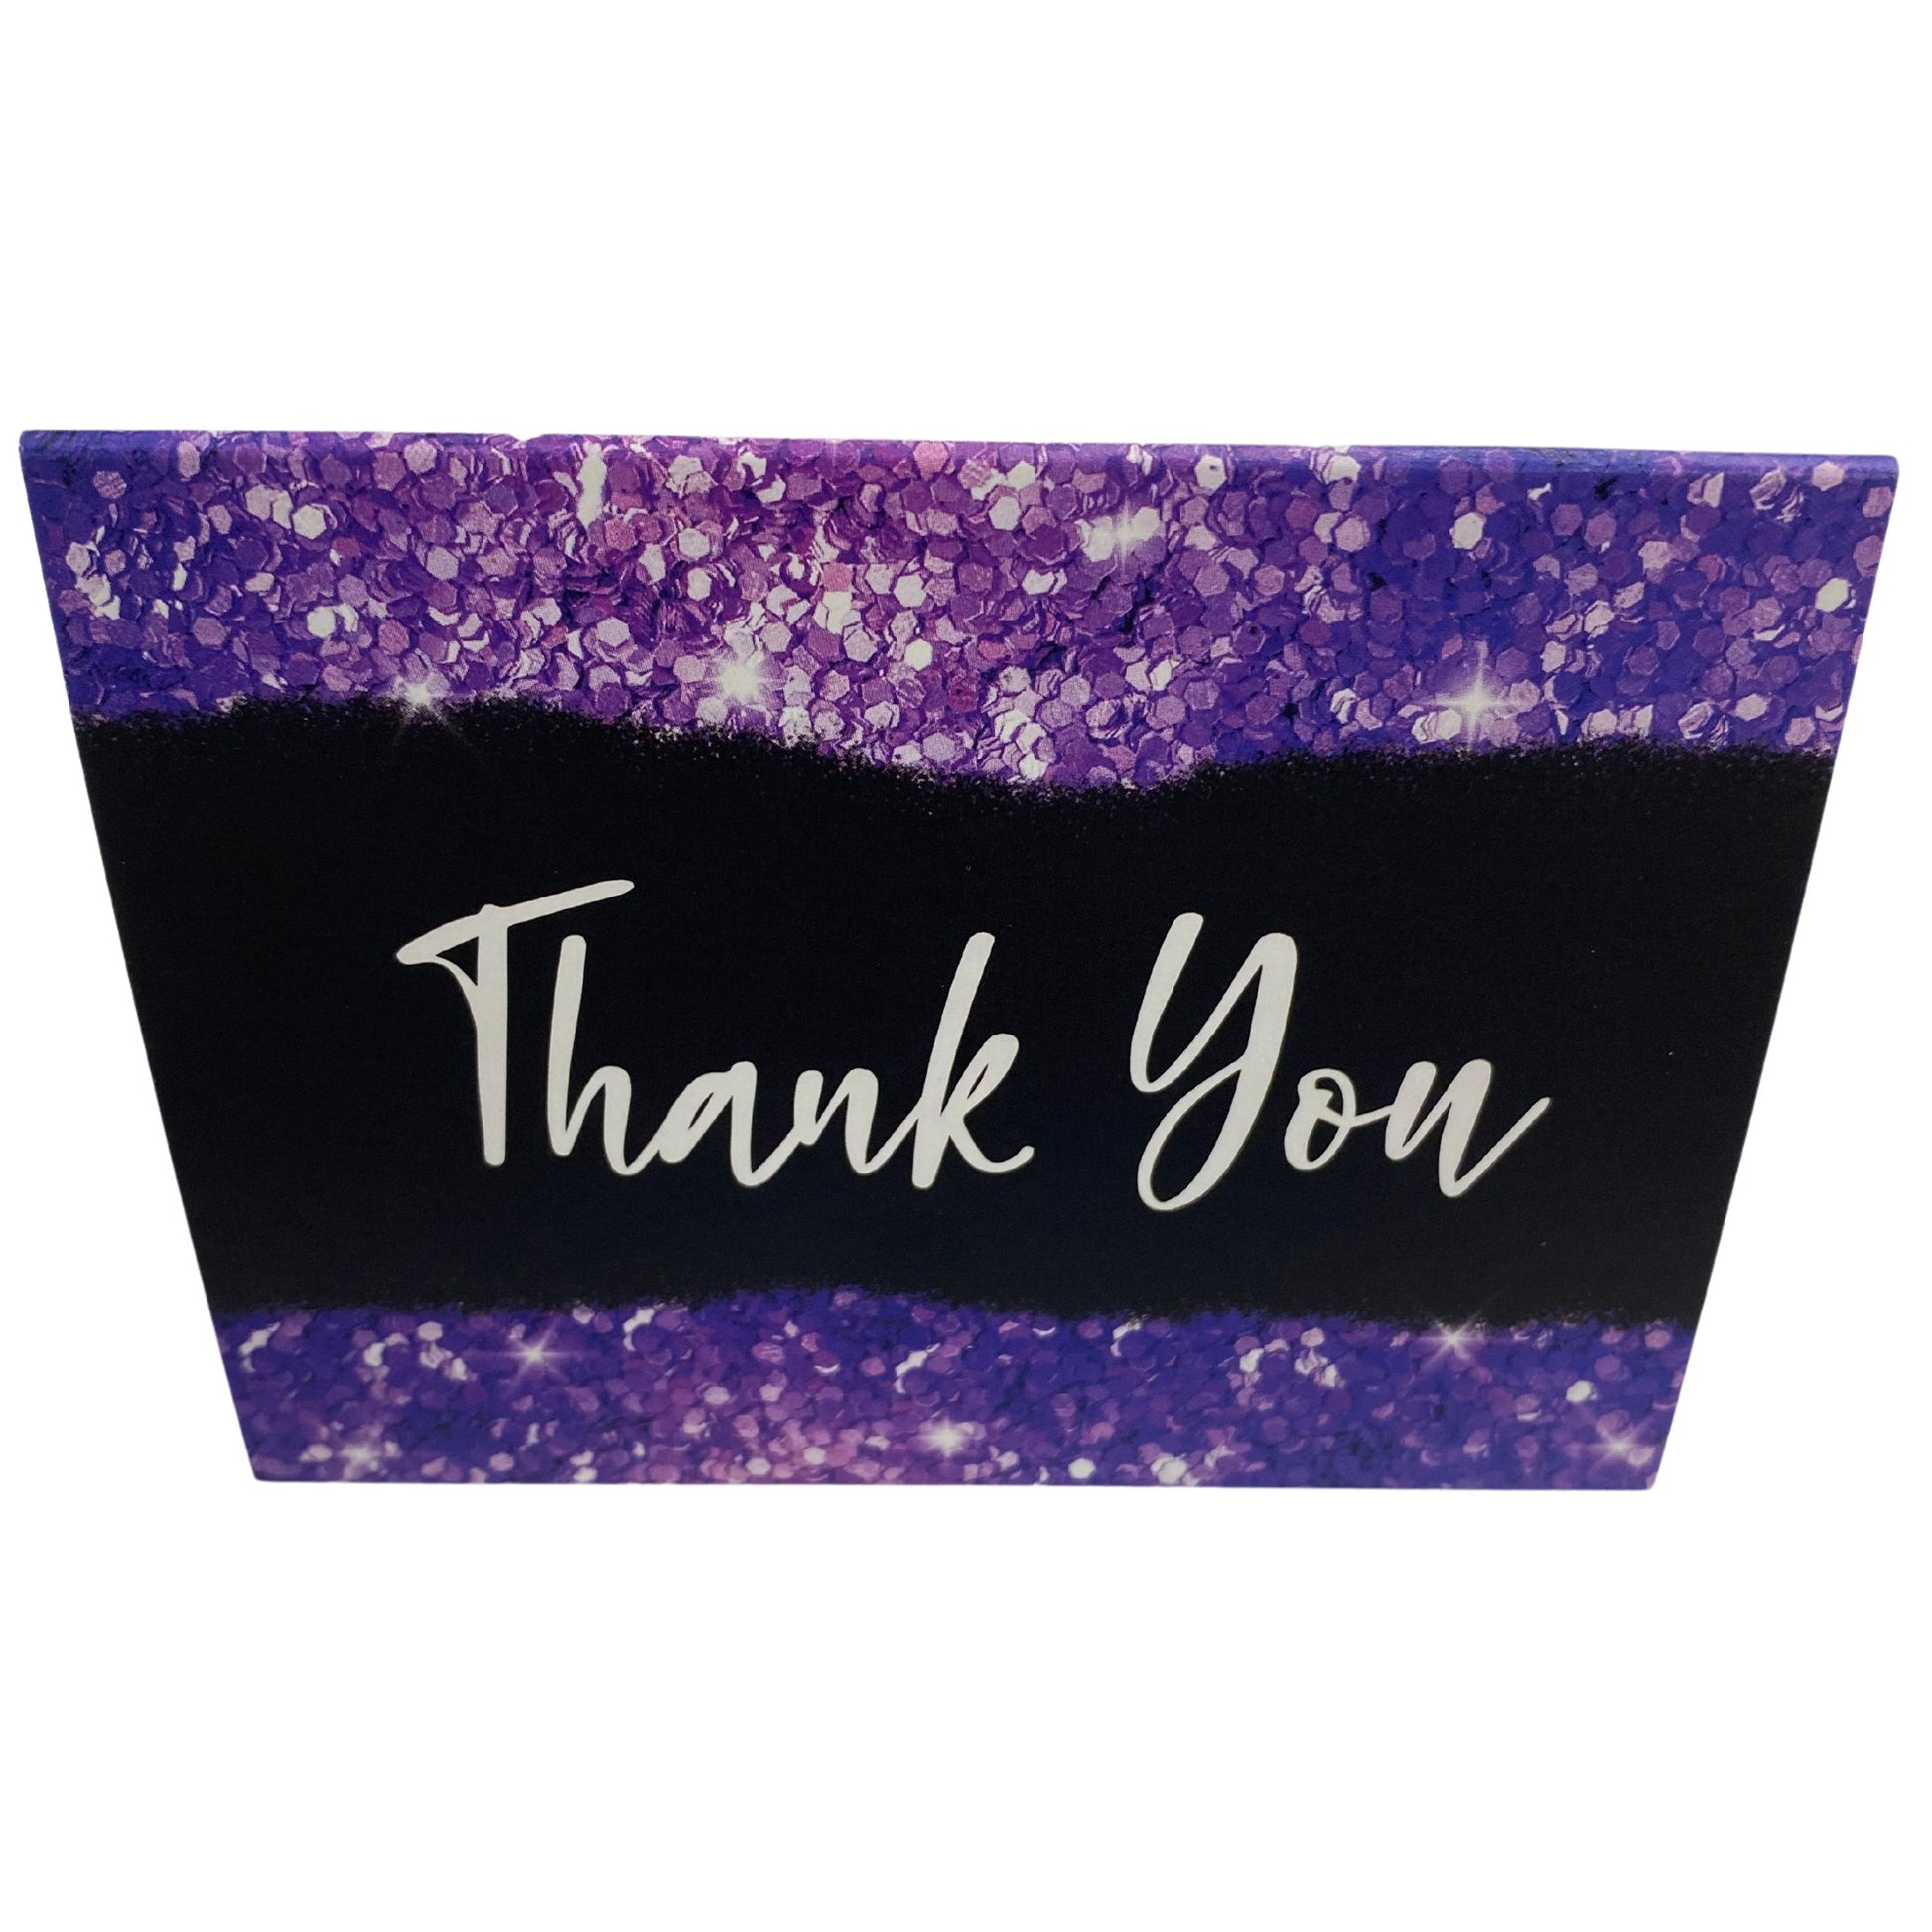 Purple Glitter Folded Thank You Scratch Off Cards for small business owners and direct sales